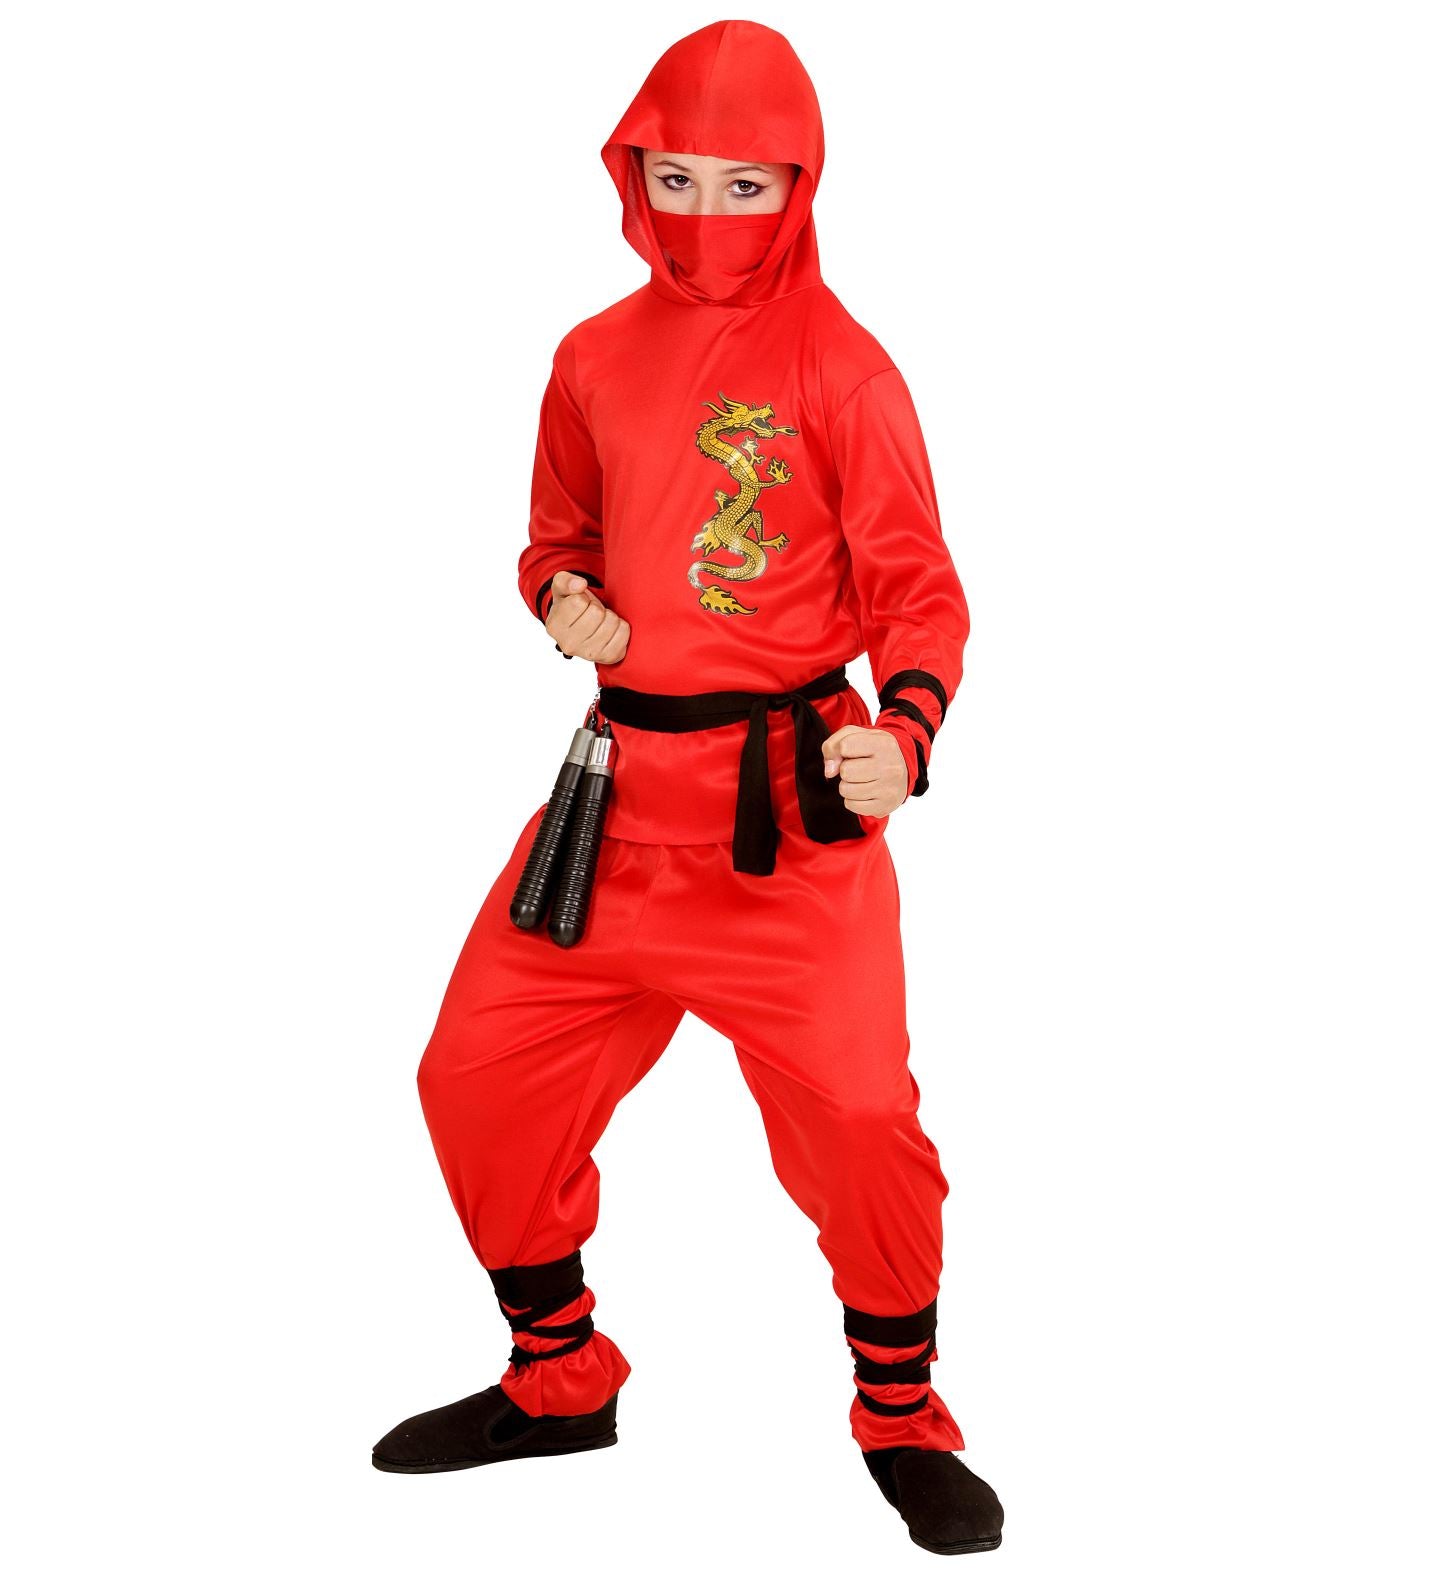 Red Dragon Ninja outfit child's